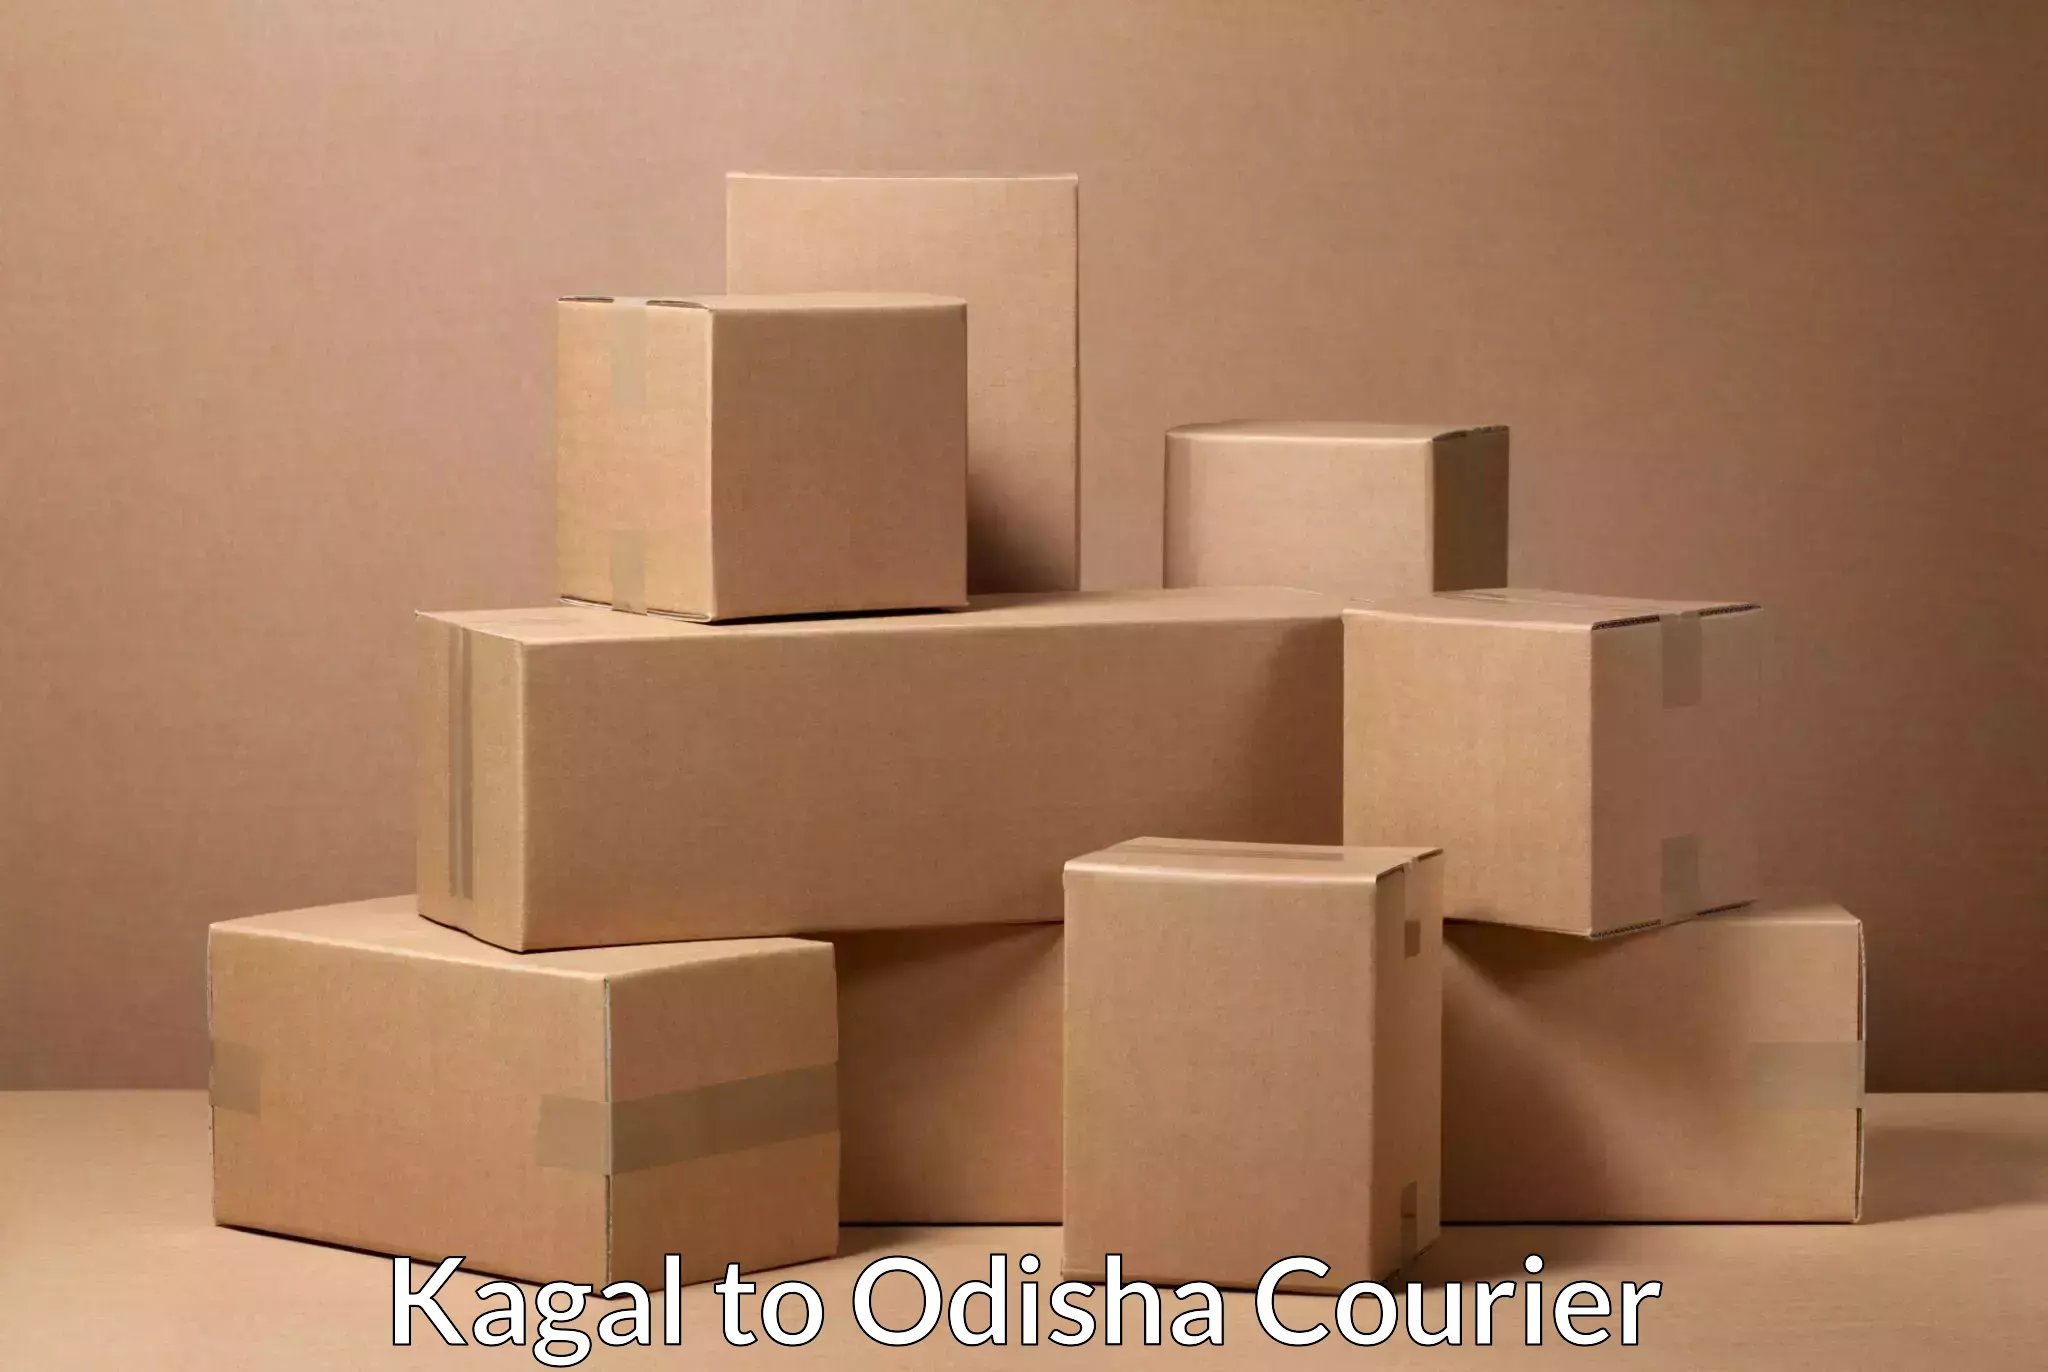 Residential courier service Kagal to Bhubaneswar